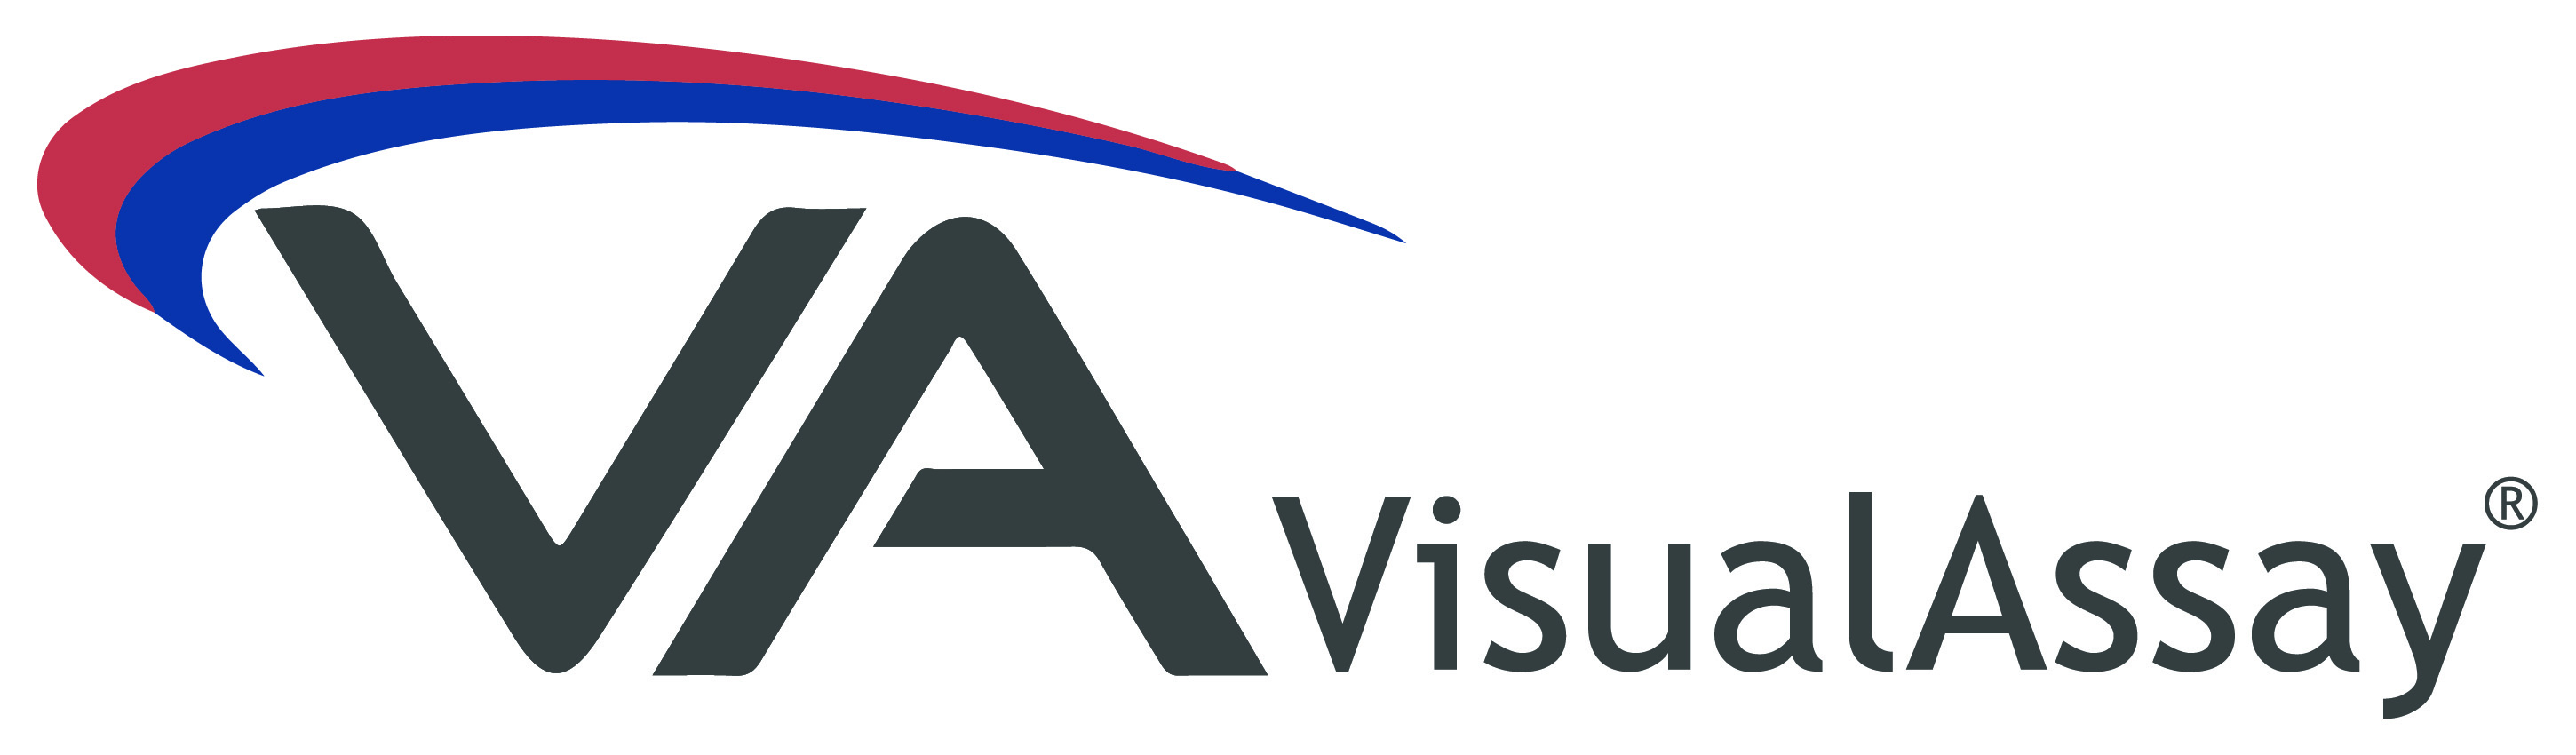 Visual Assay by Label Independent, Inc